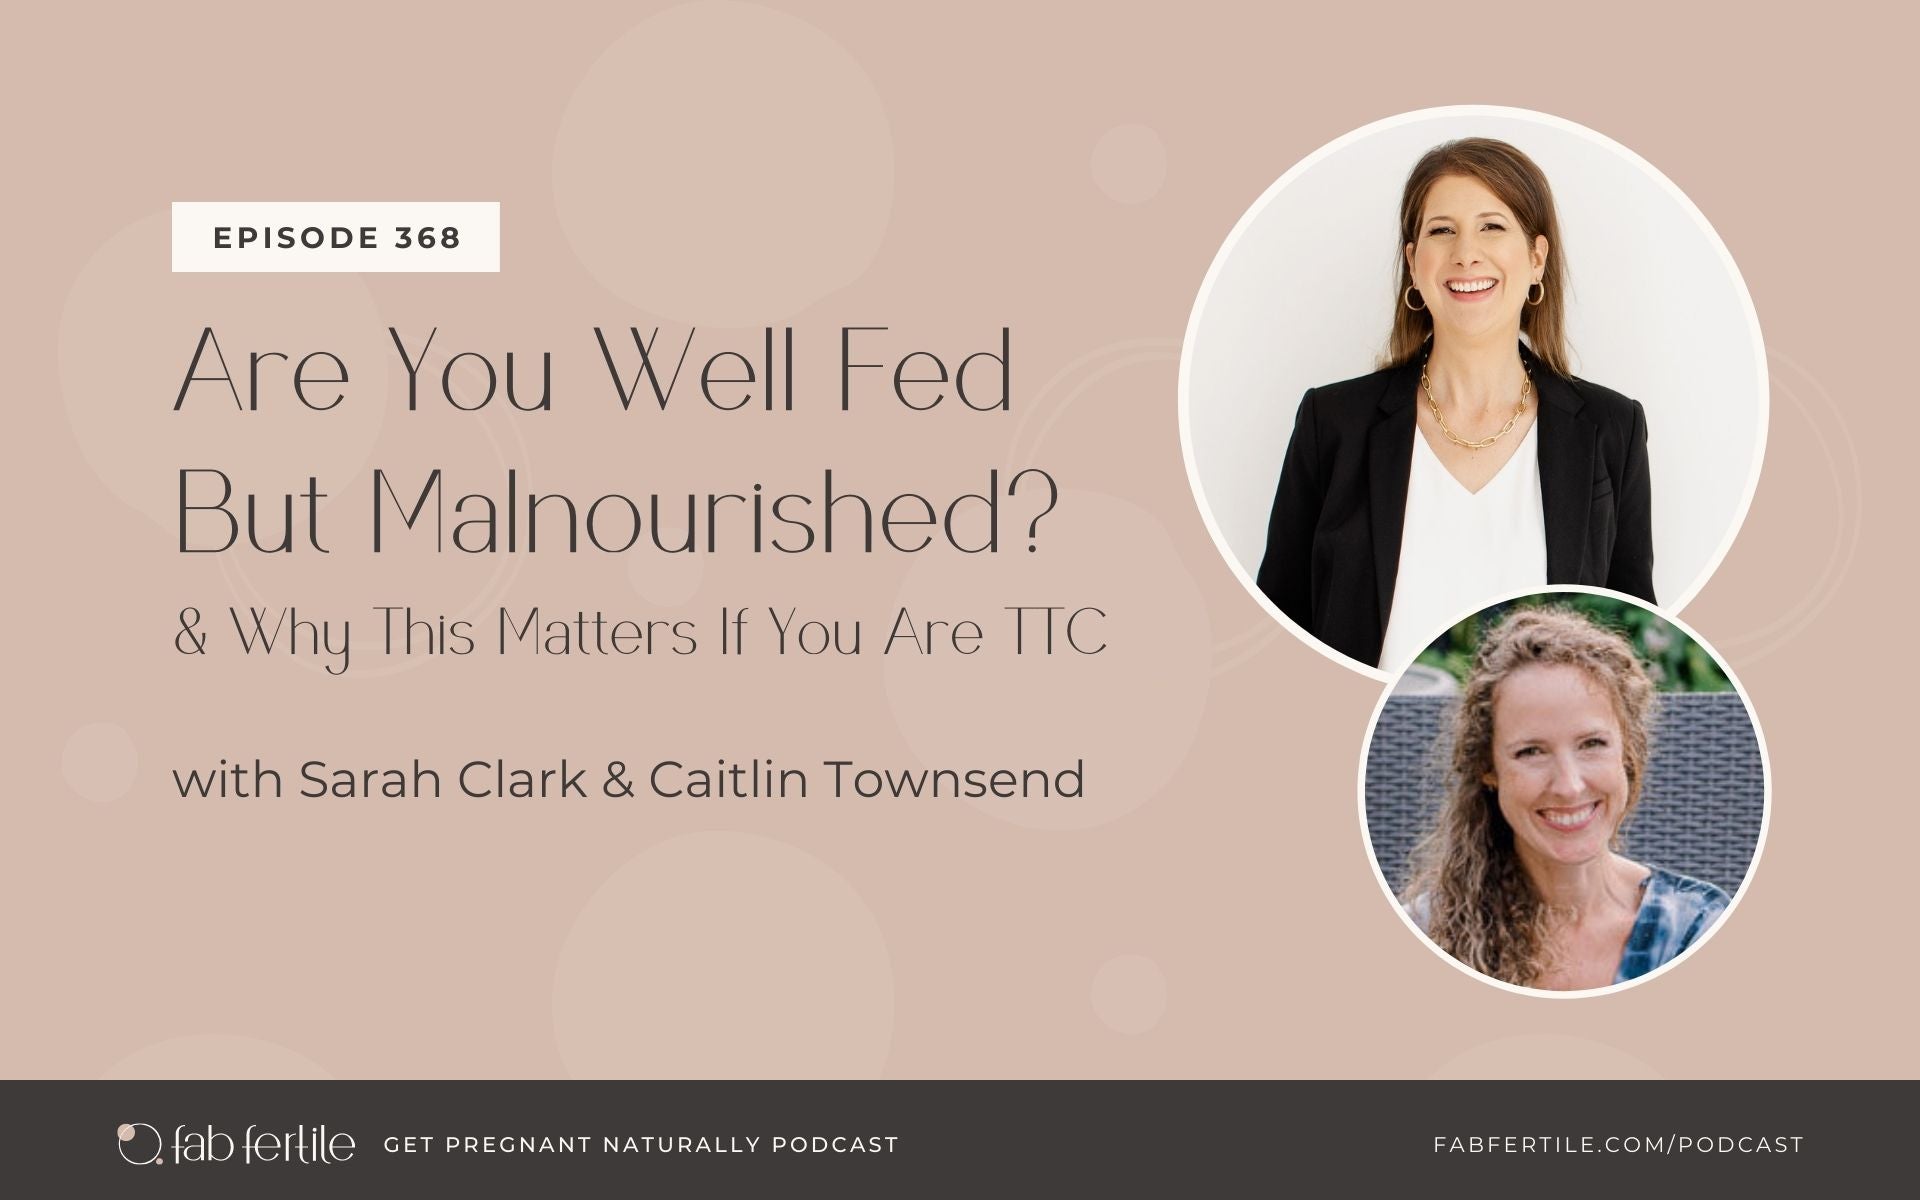 Are You Well Fed But Malnourished? Why This Matters If You Are TTC